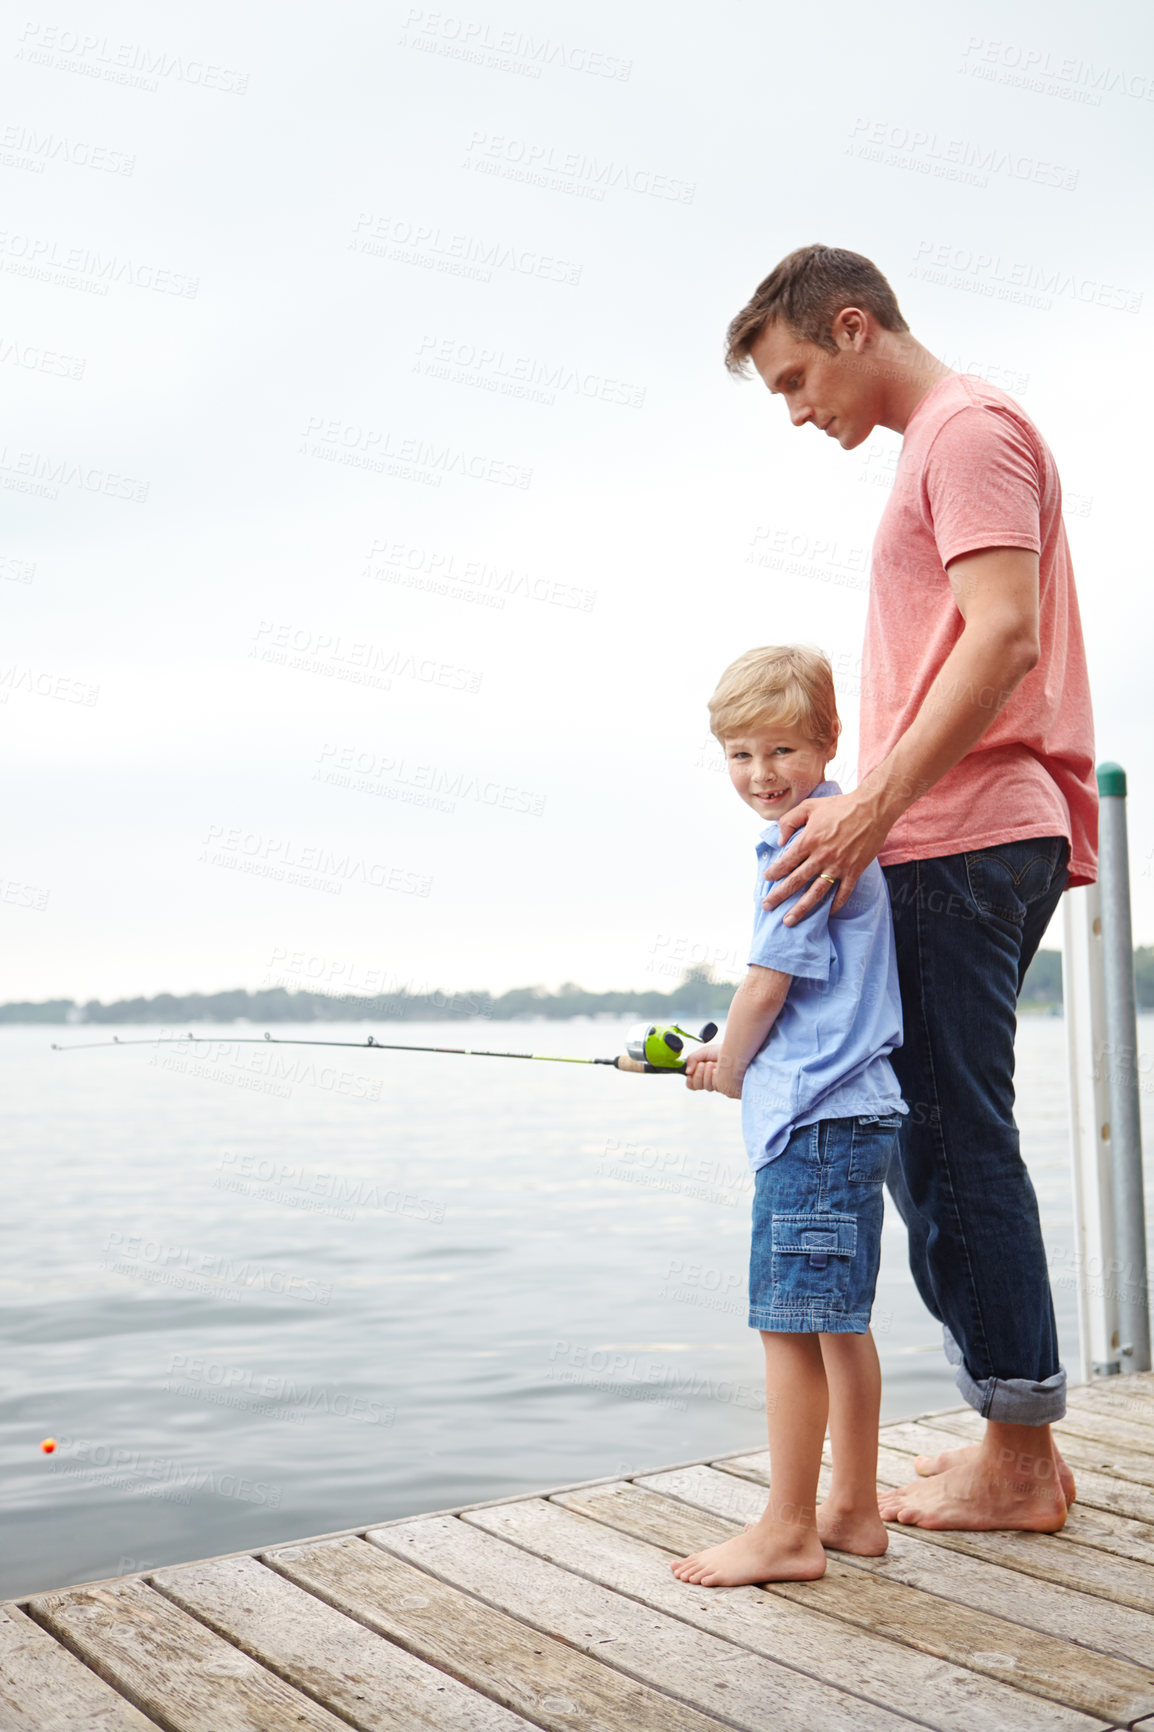 Buy stock photo A father teaching his son how to fish